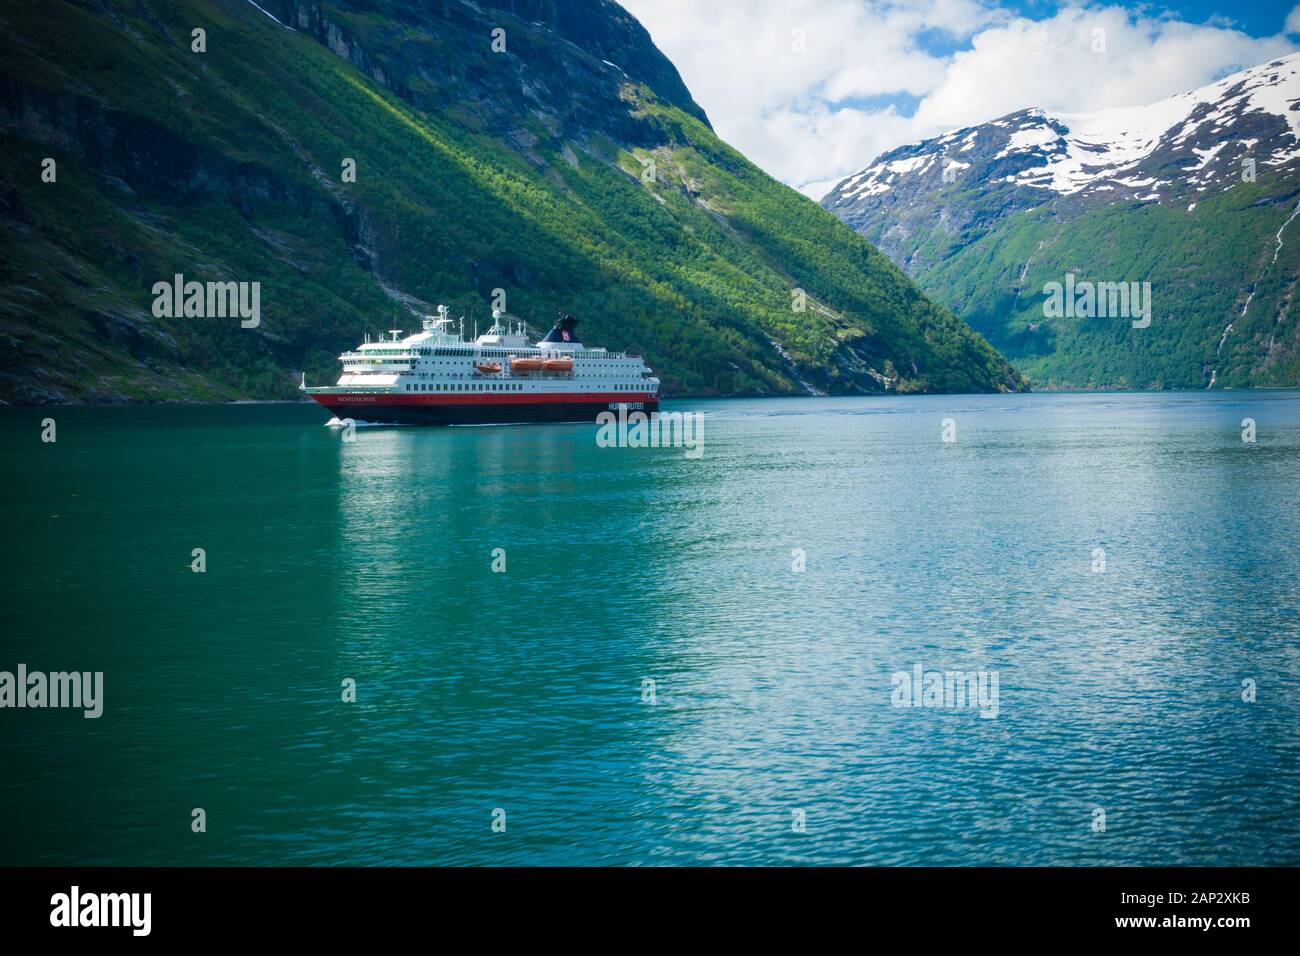 Geiranger fjord, Norway-JUNE 15,2012: the cruise ferry Hurtigruten sails along Geirangerfjord. The trip has been described as the 'World's Most Beauti Stock Photo